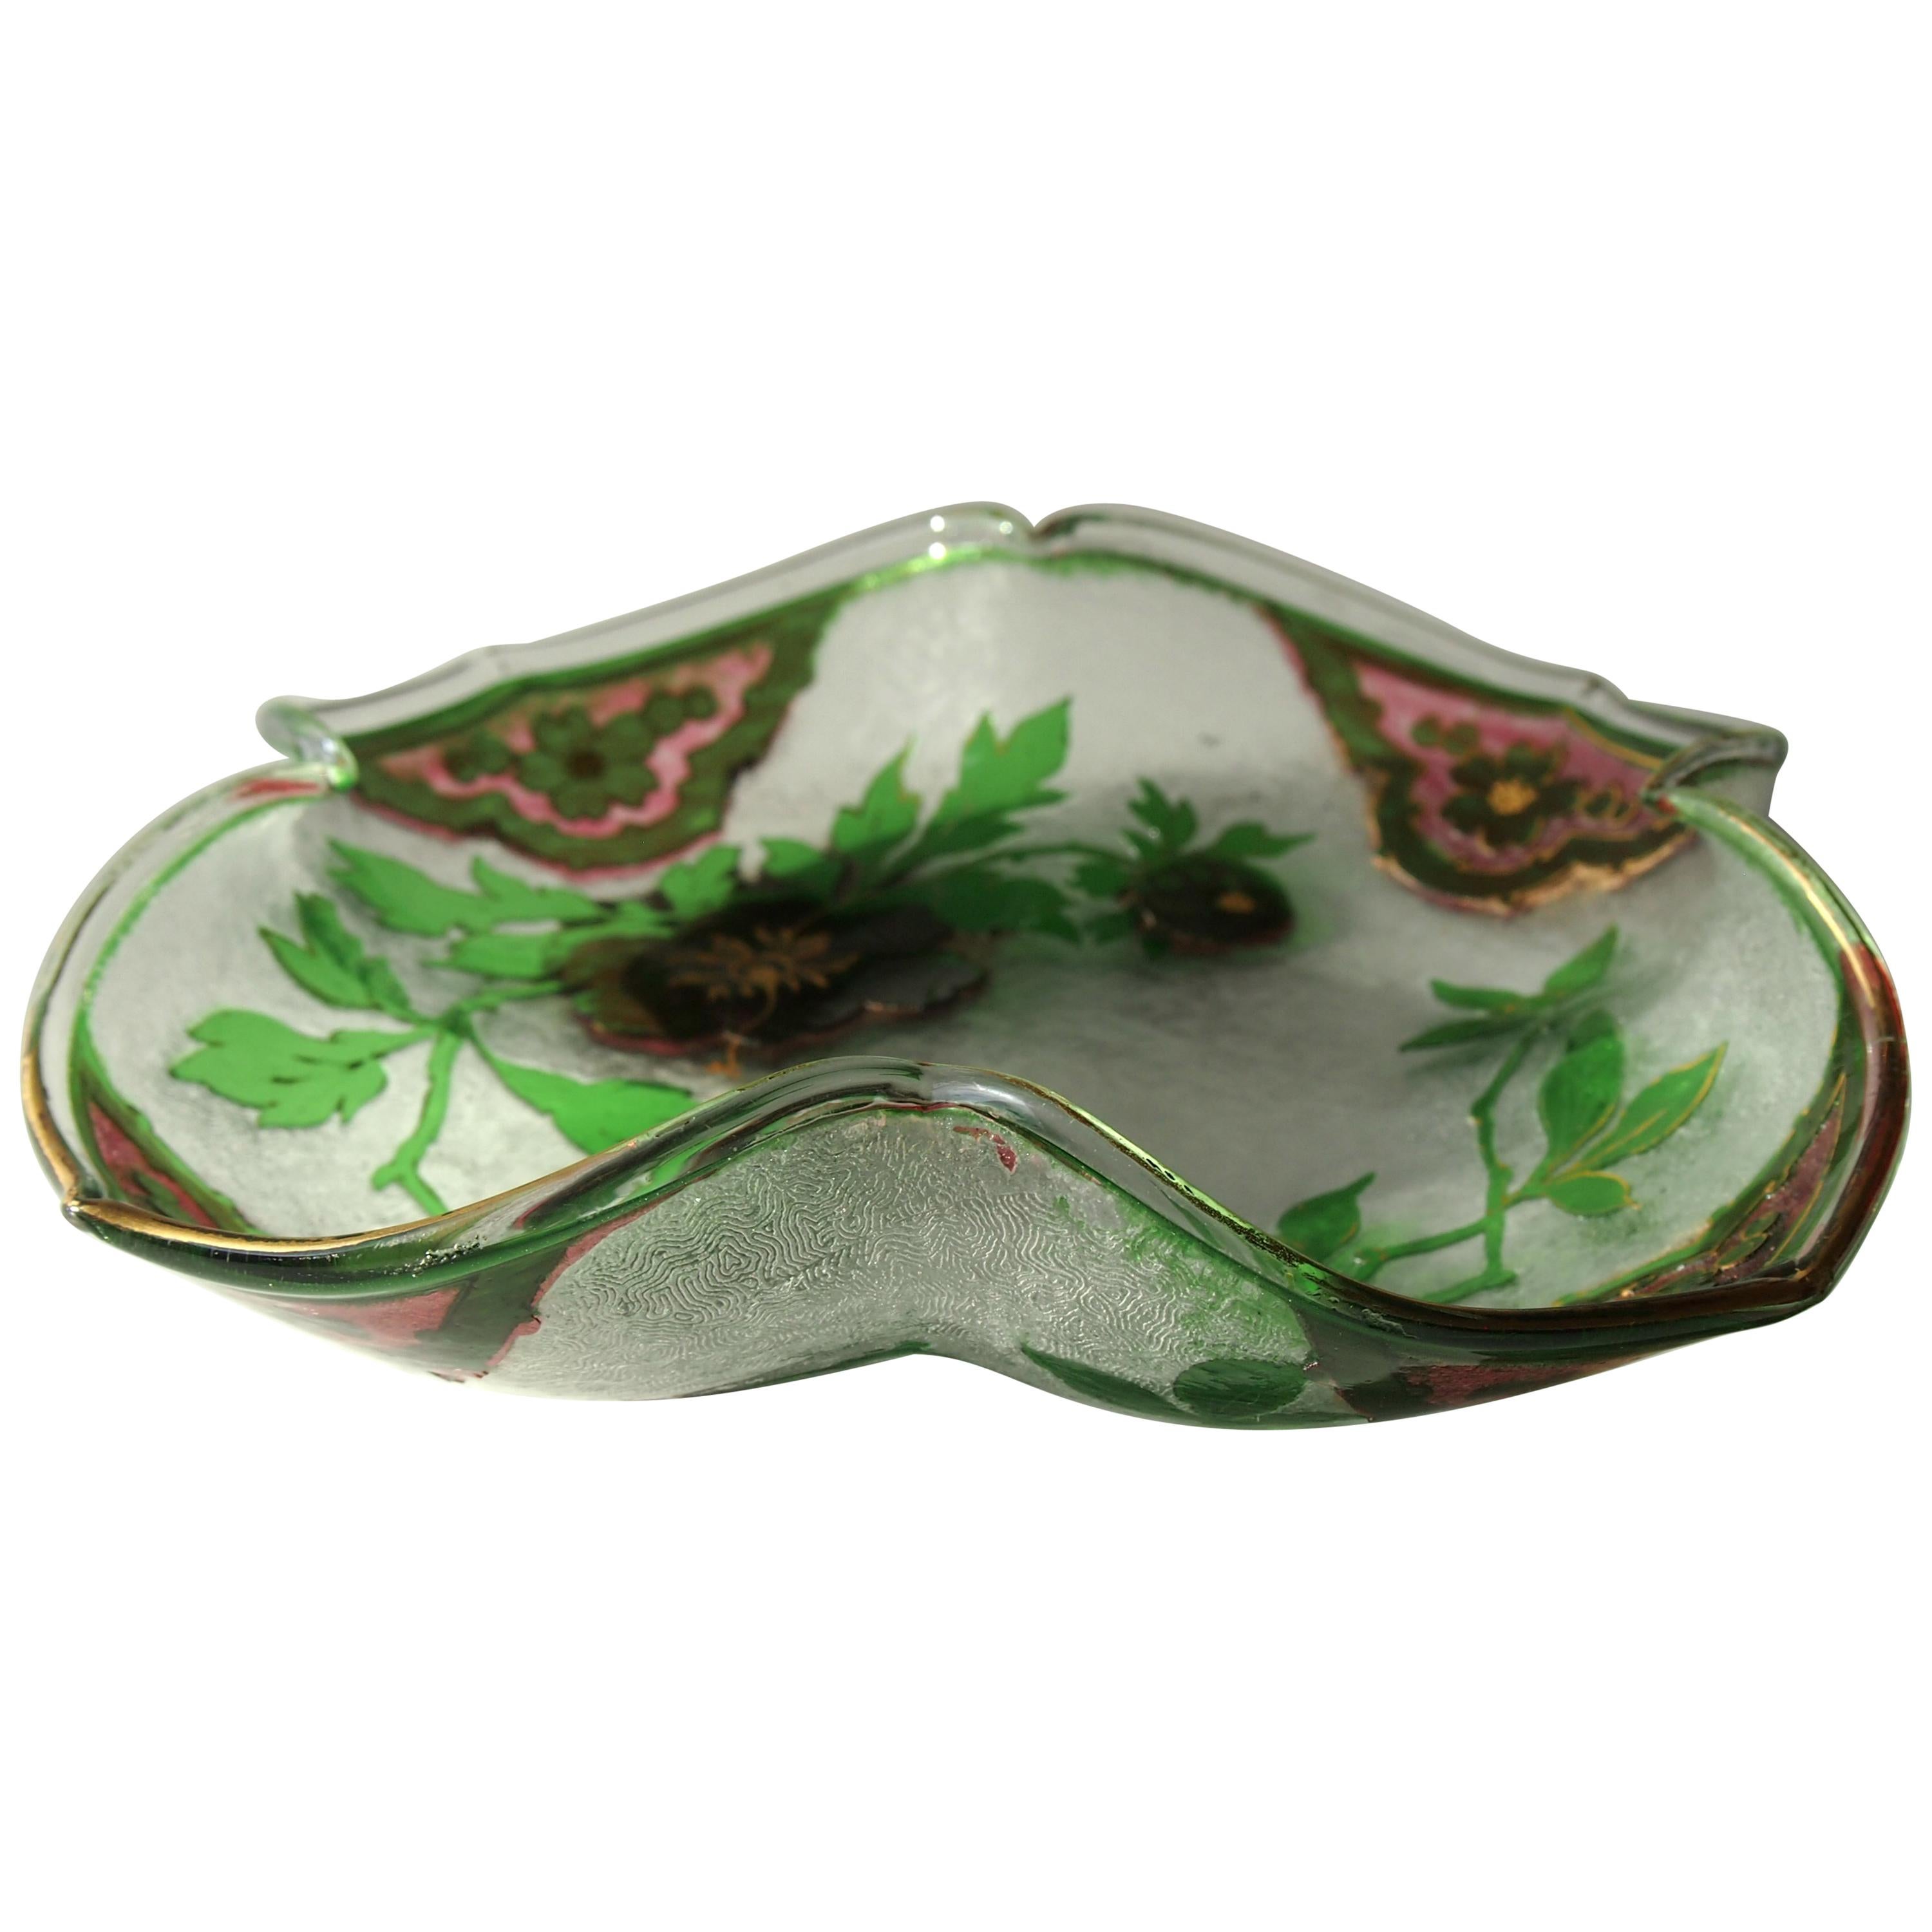 Bohemian Art Nouveau Pink and Green Cameo Glass Dish by Riedel, circa 1900 im Angebot